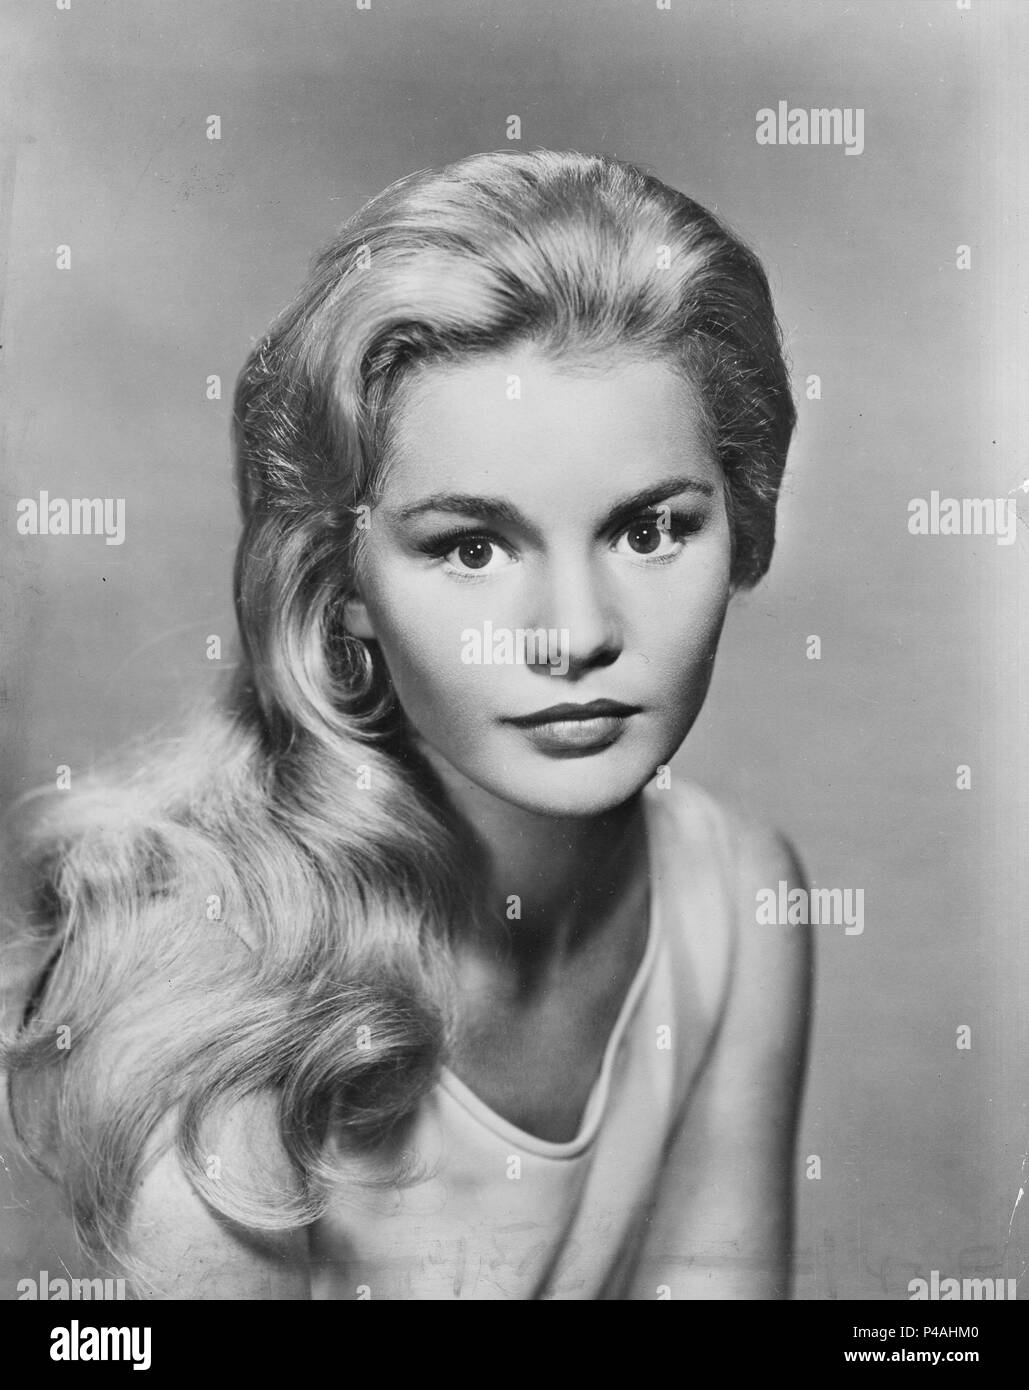 Dreamy Photos Of Forgotten Style Icon Tuesday Weld